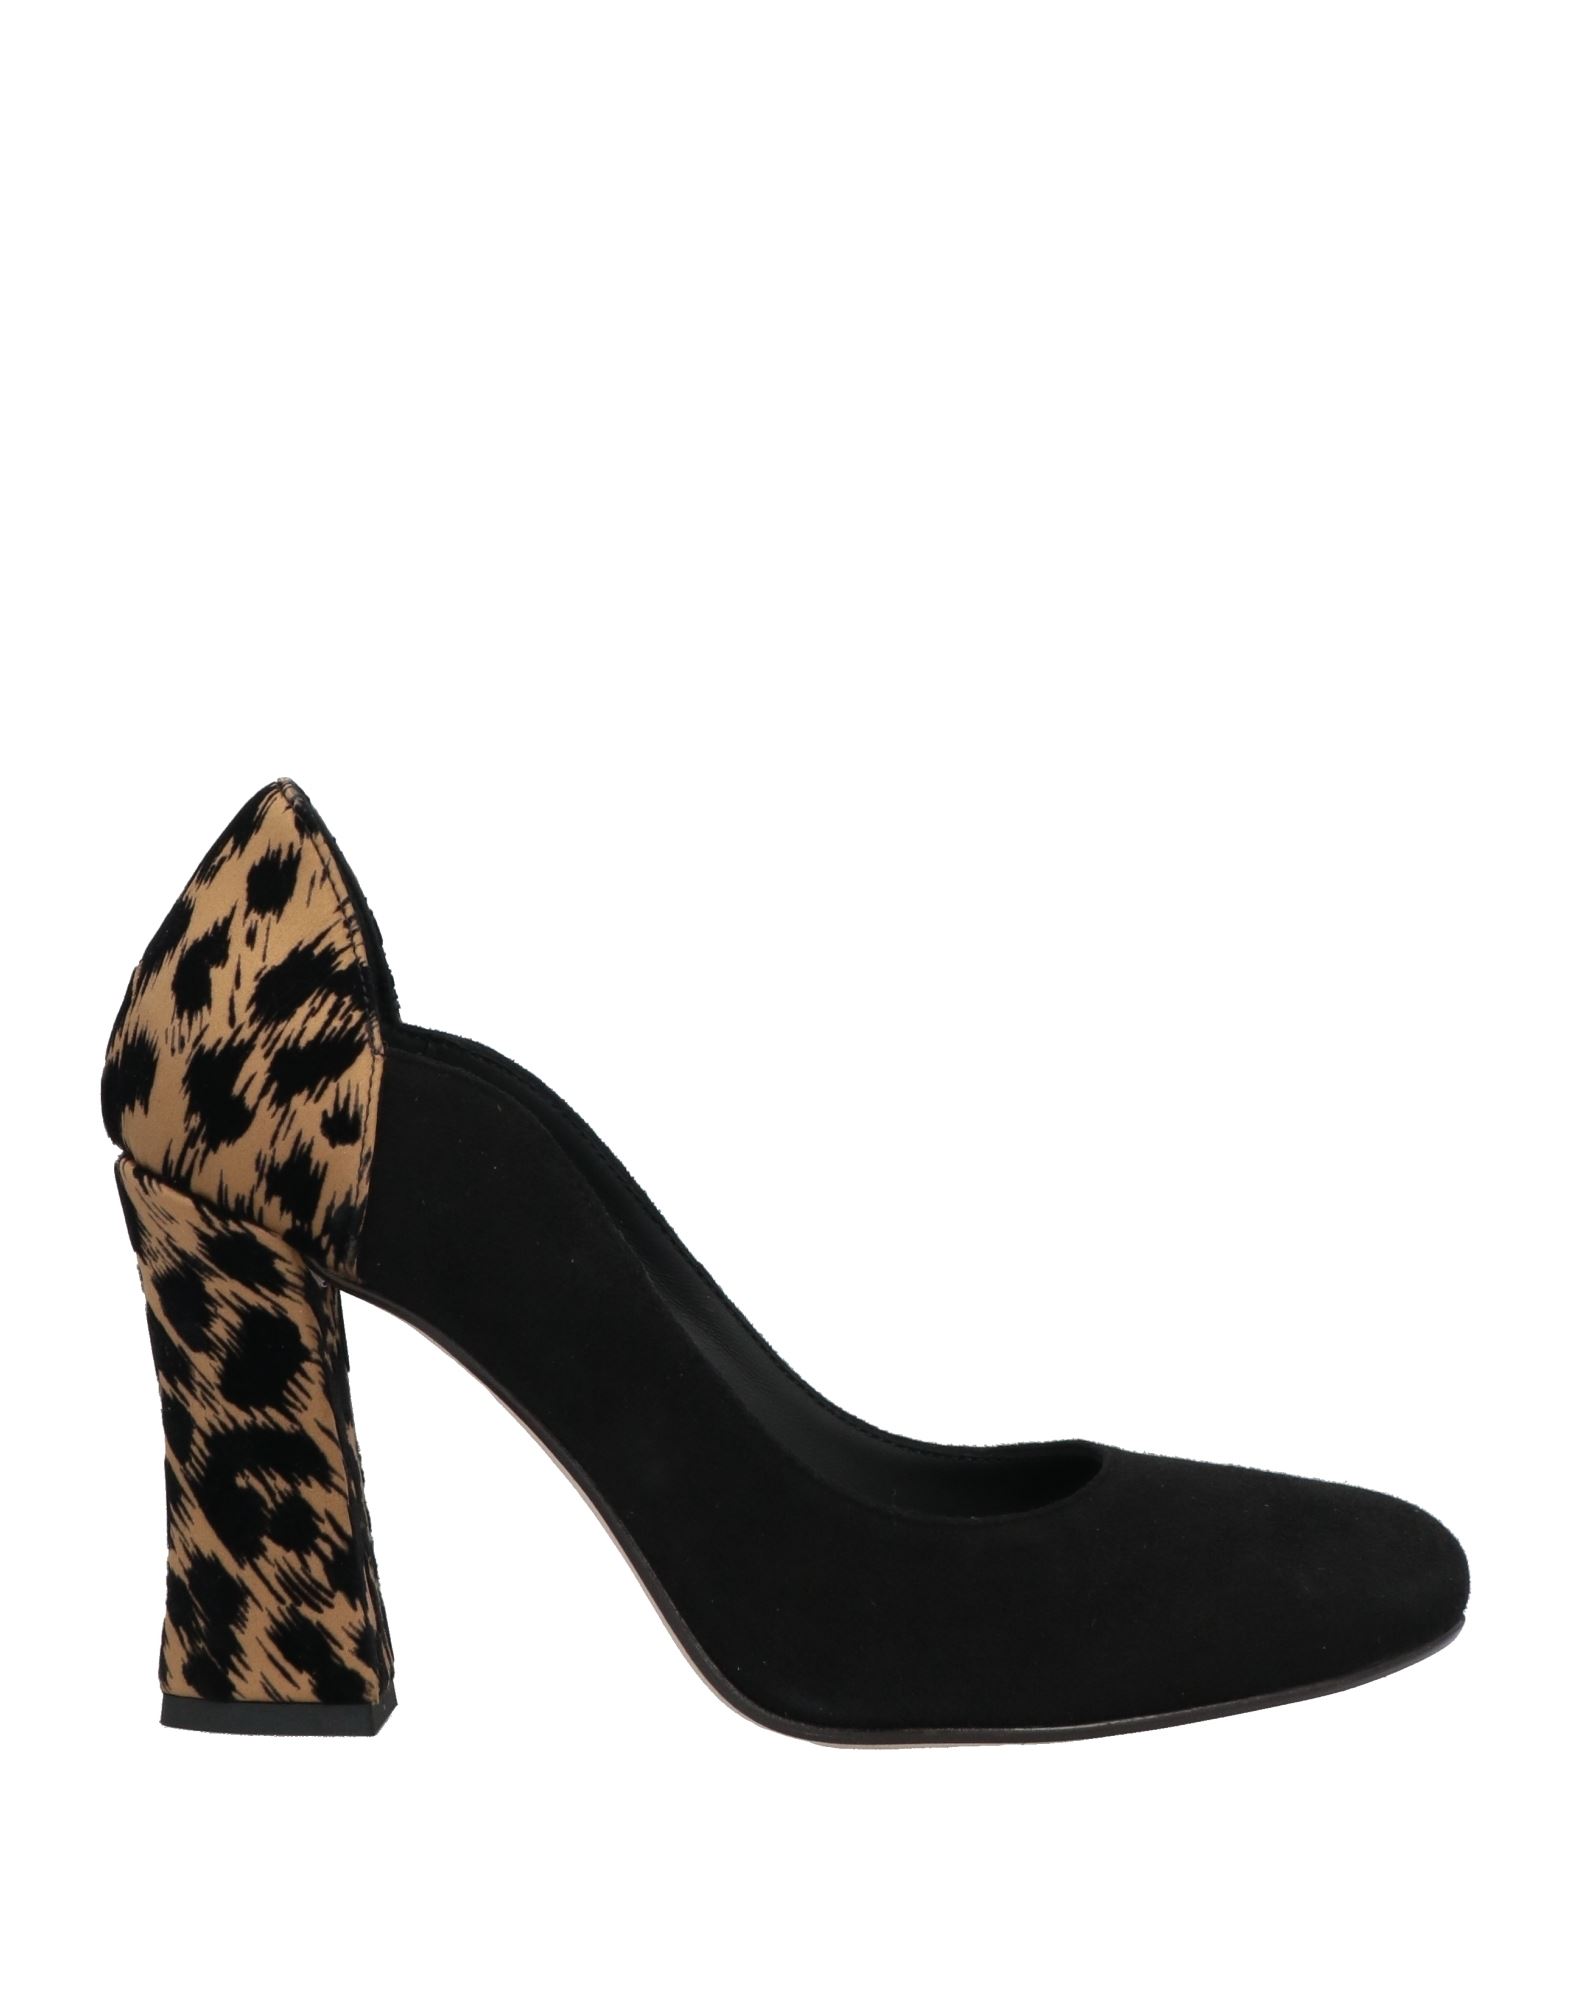 Sgn Giancarlo Paoli Pumps In Black